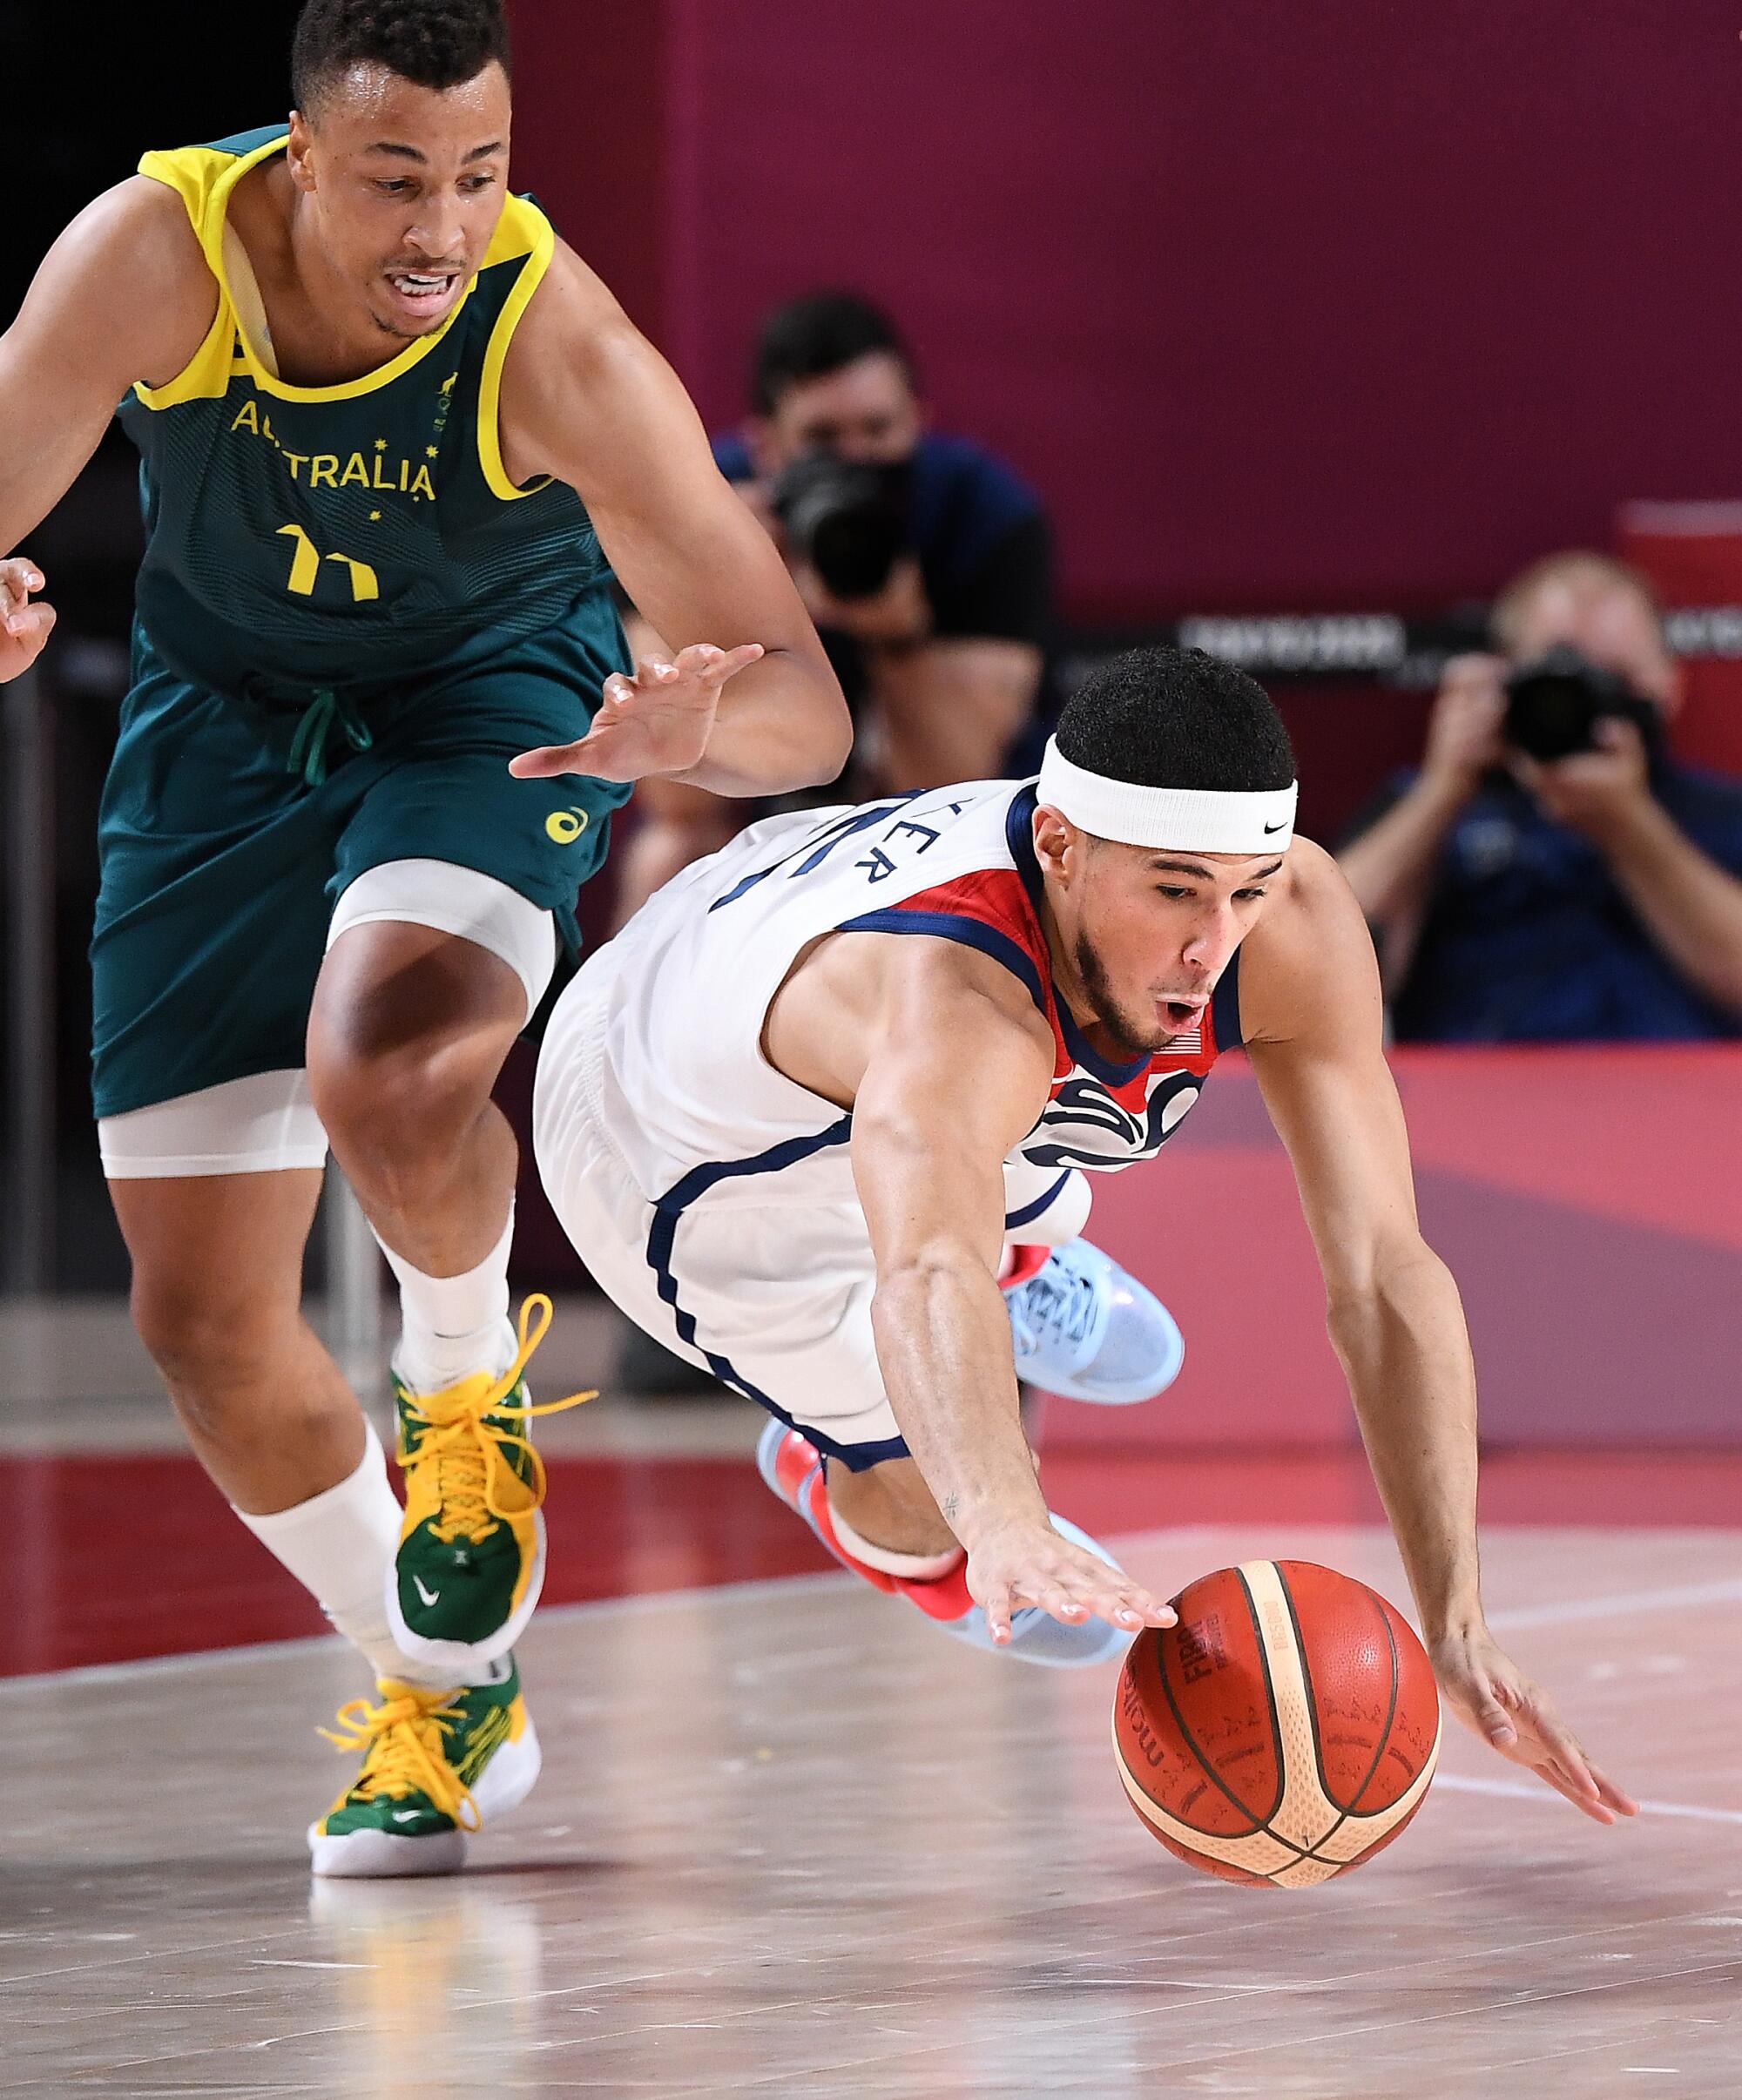 USA's Devin Booker dives to steal the ball against Australia's Dante Exum in the second half of a semi-final game